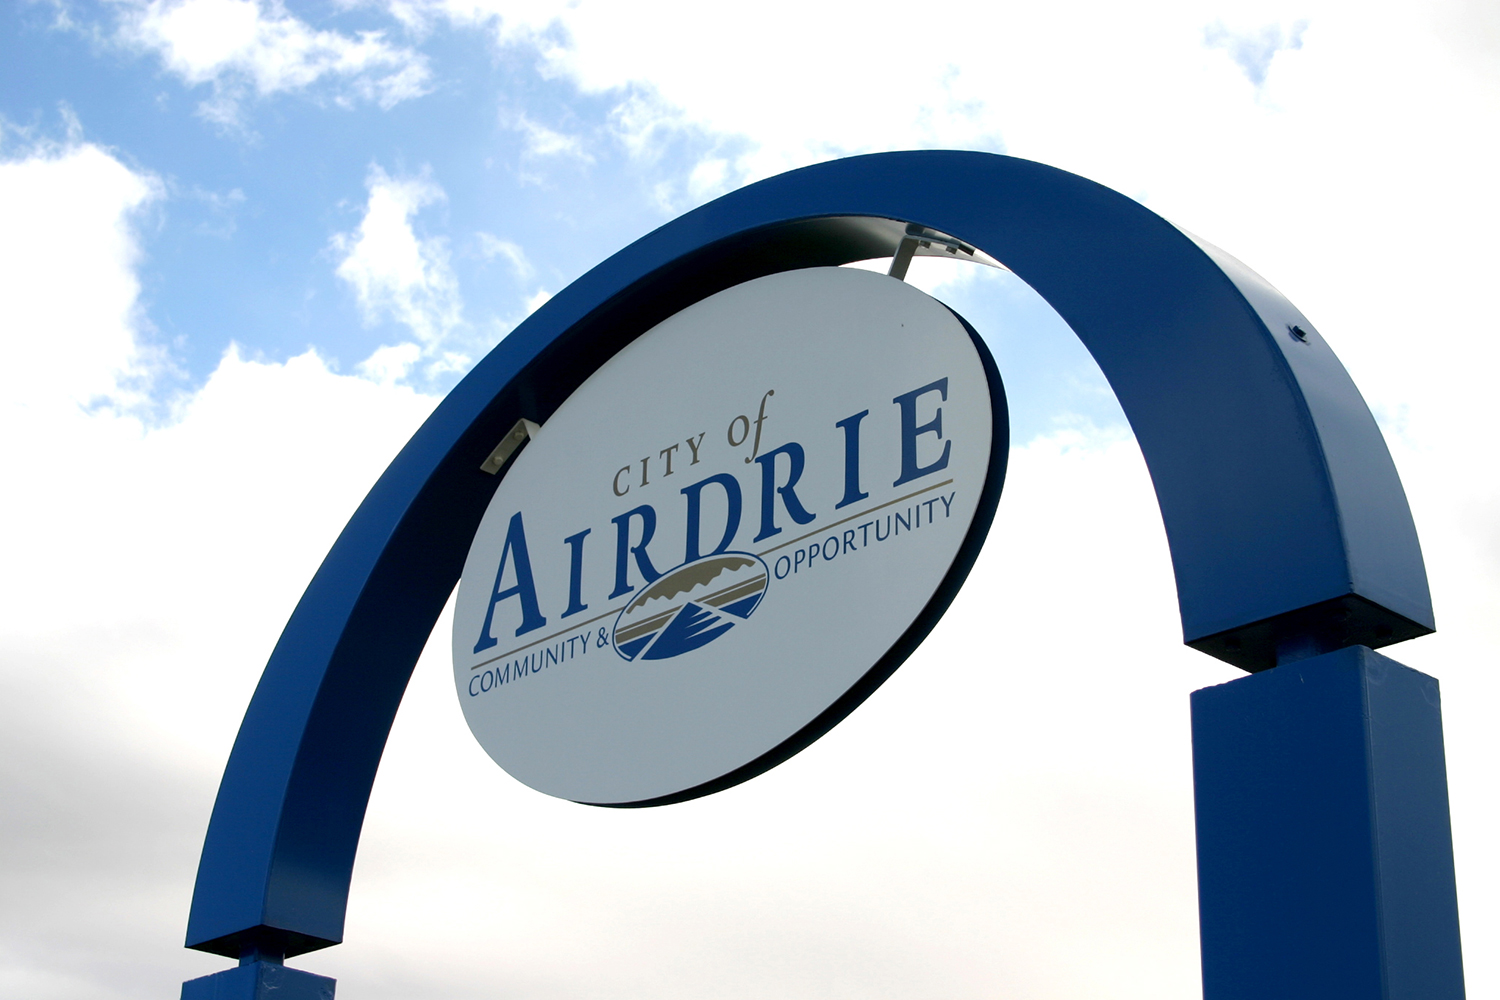 Airdrie has a young, growing population that gives the small city a unique and attractive vibe.
Courtesy City of Airdrie